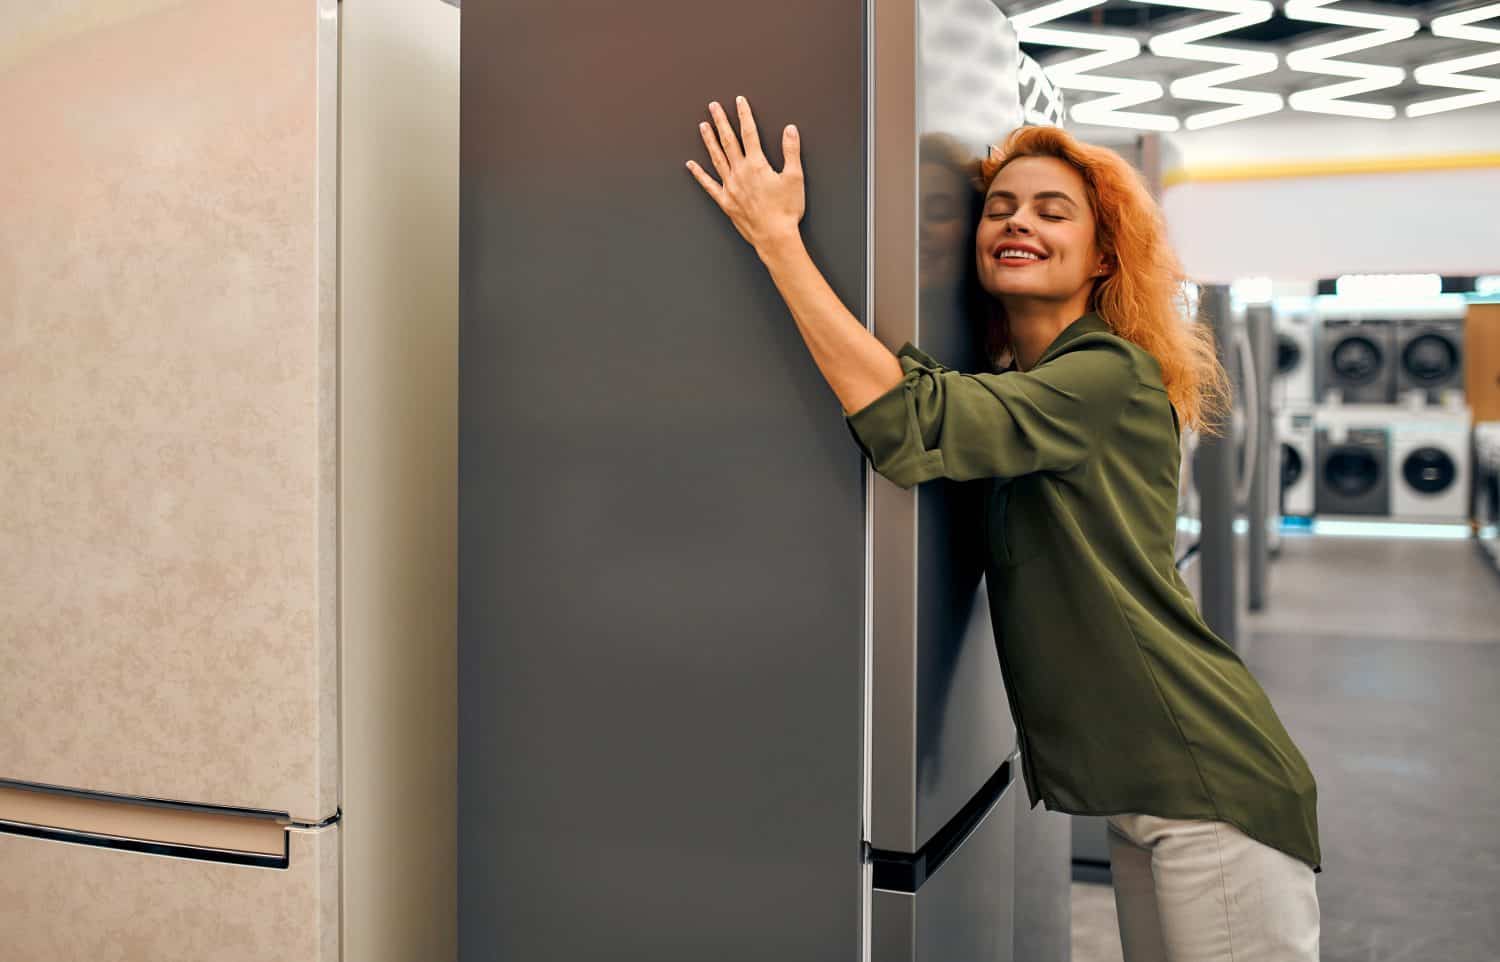 Woman hugging a refrigerator in a home appliances and electronics store. Buying a new refrigerator.